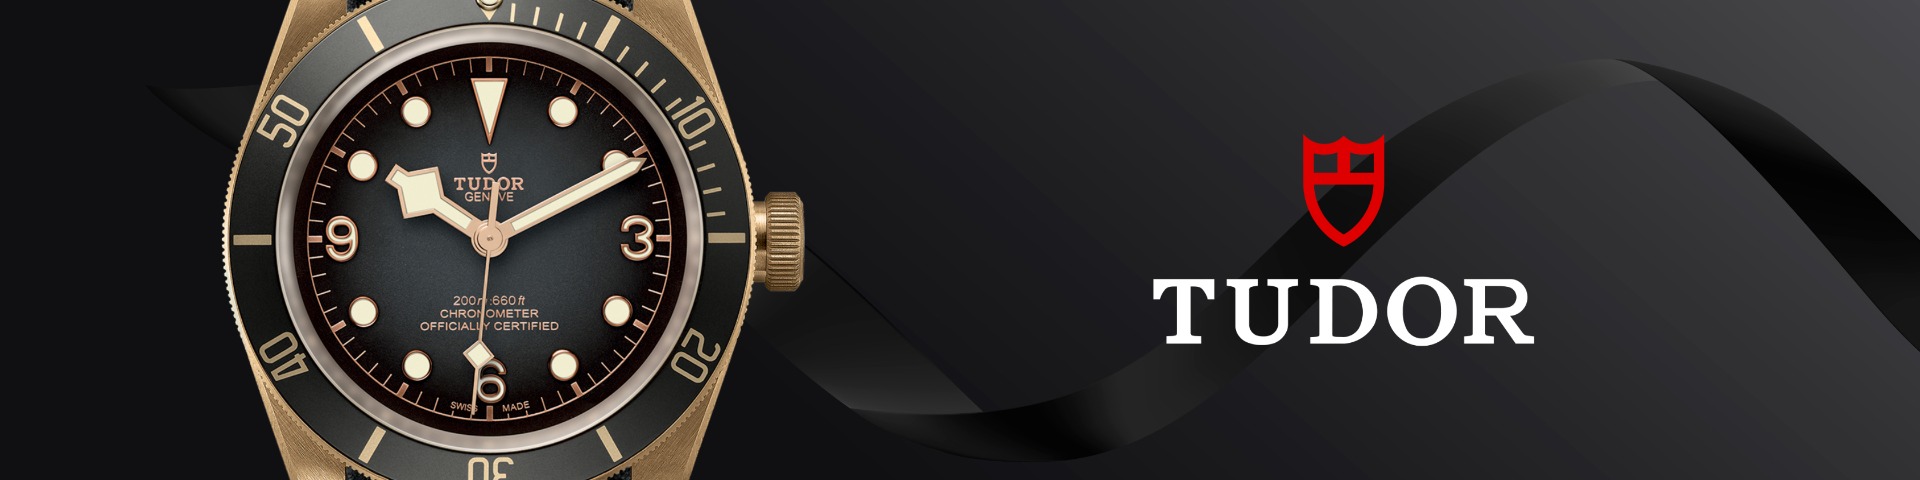 4 TUDOR WATCHES THAT MAKE A GOOD INVESTMENT